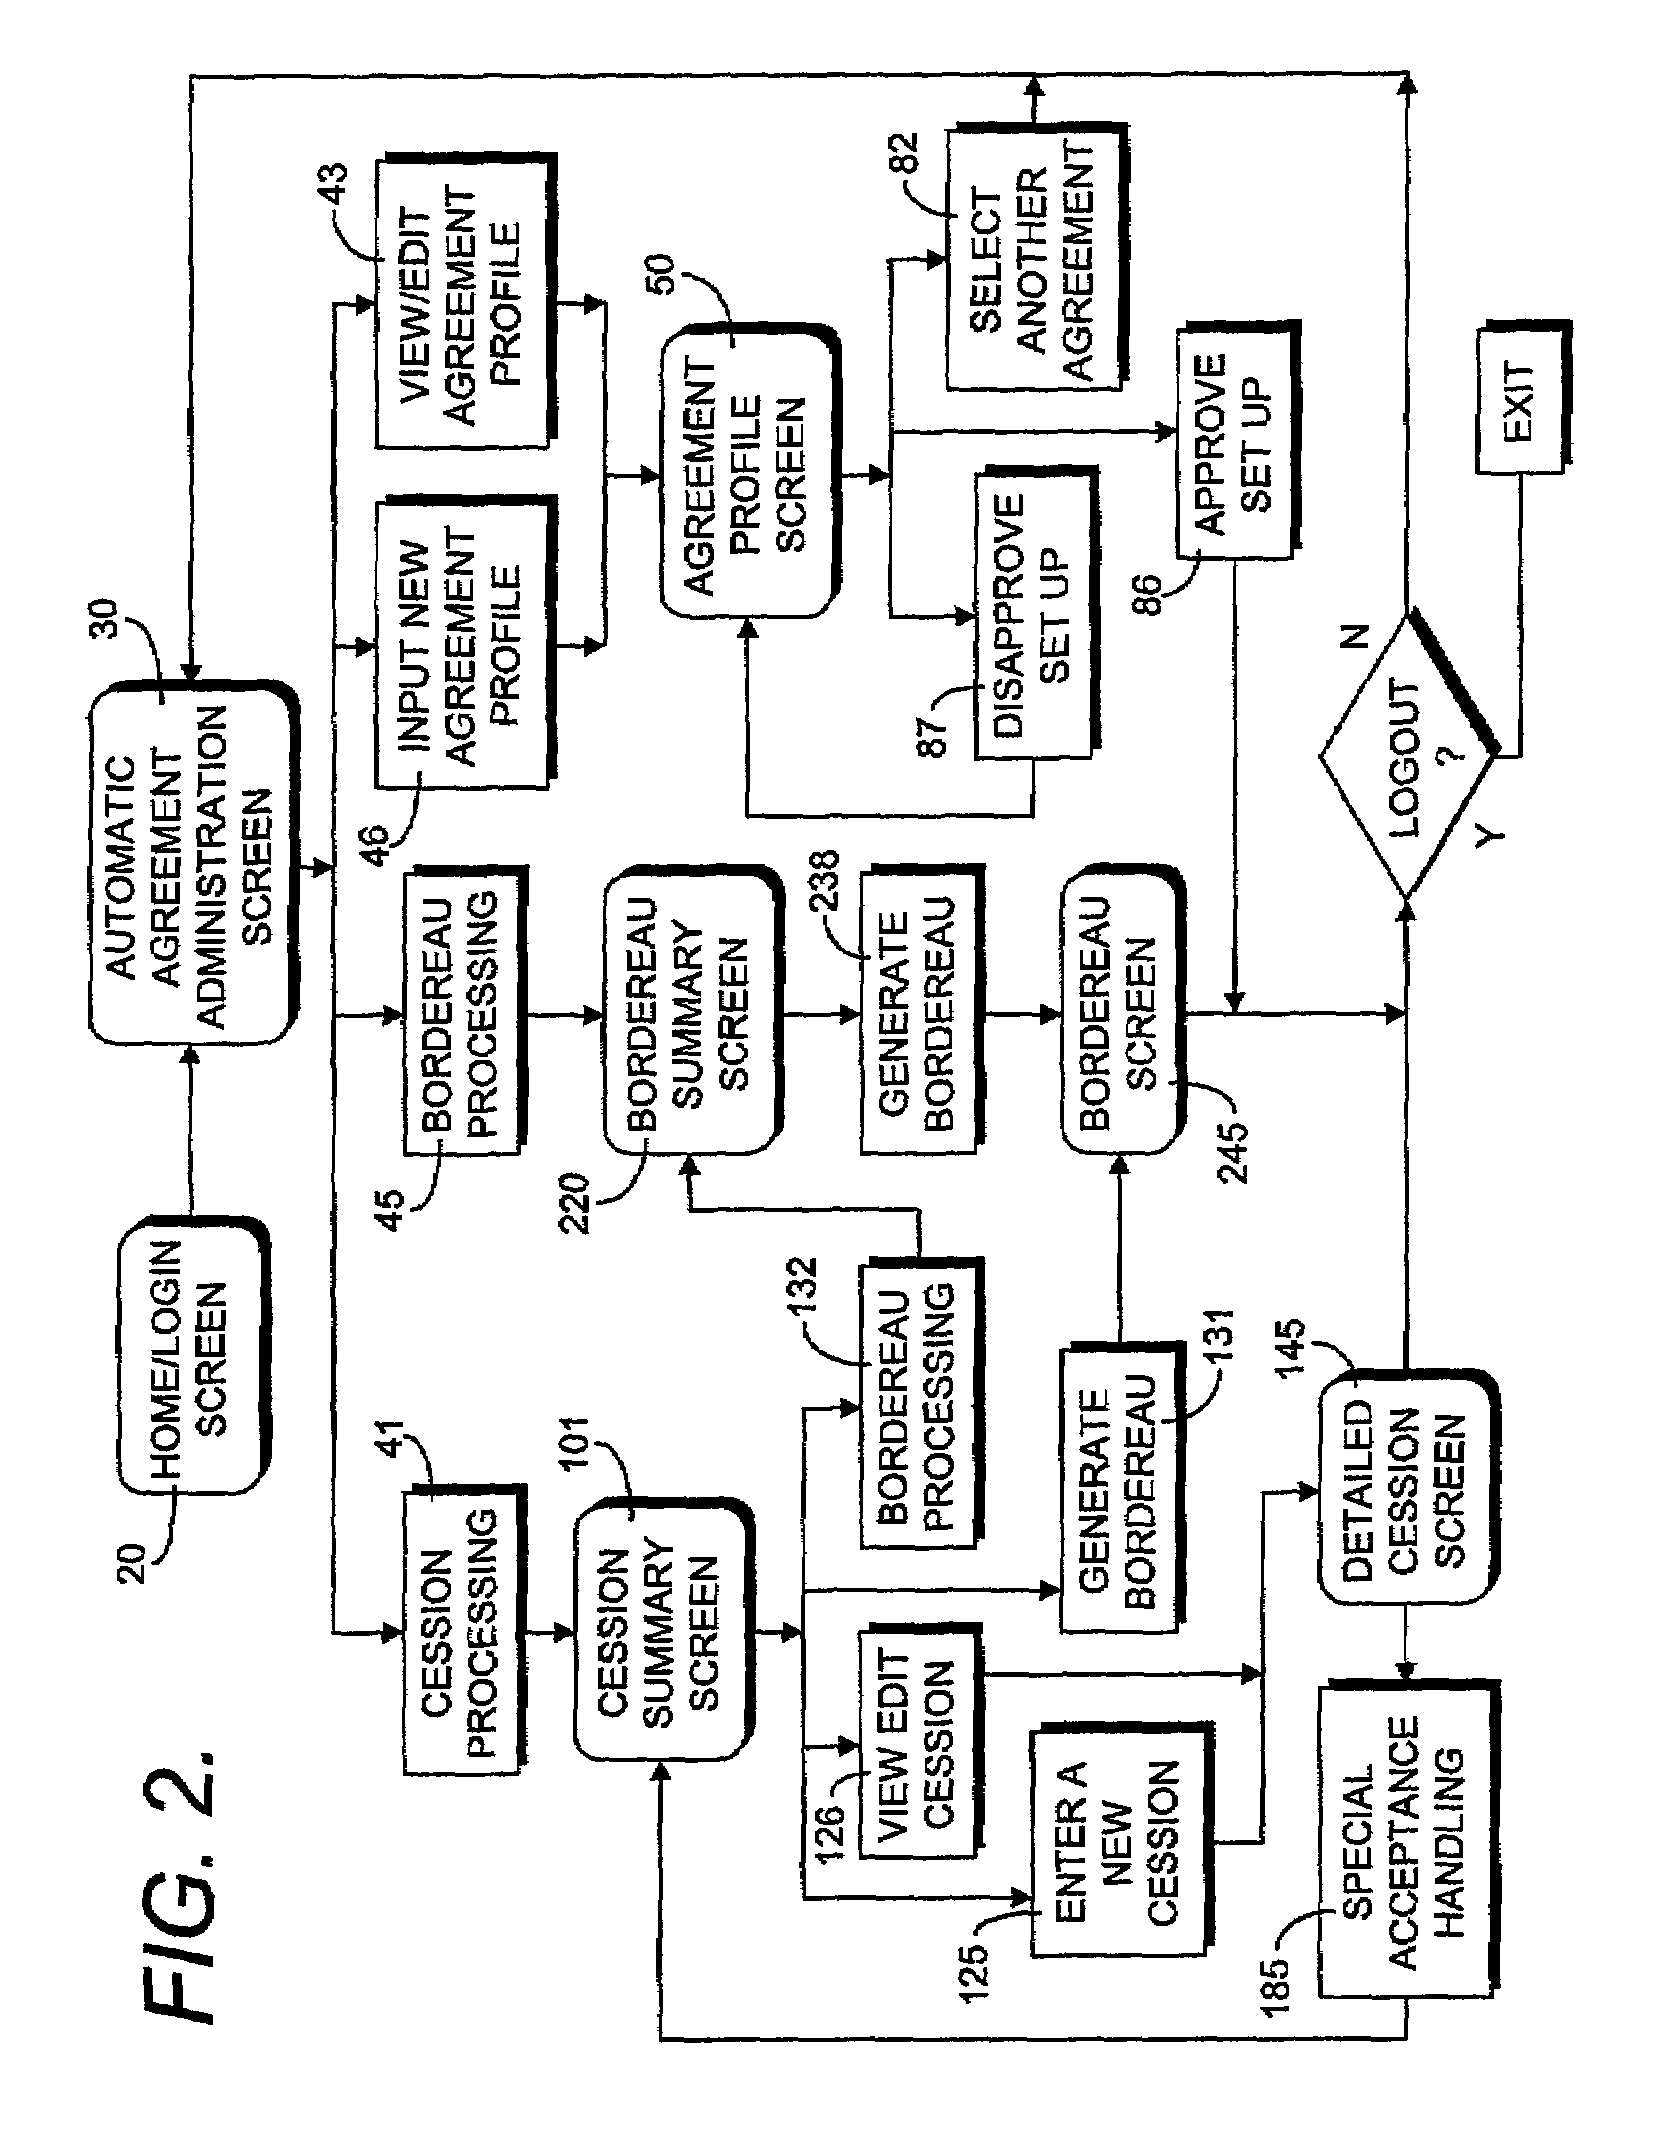 Online method for binding automatic type reinsurance